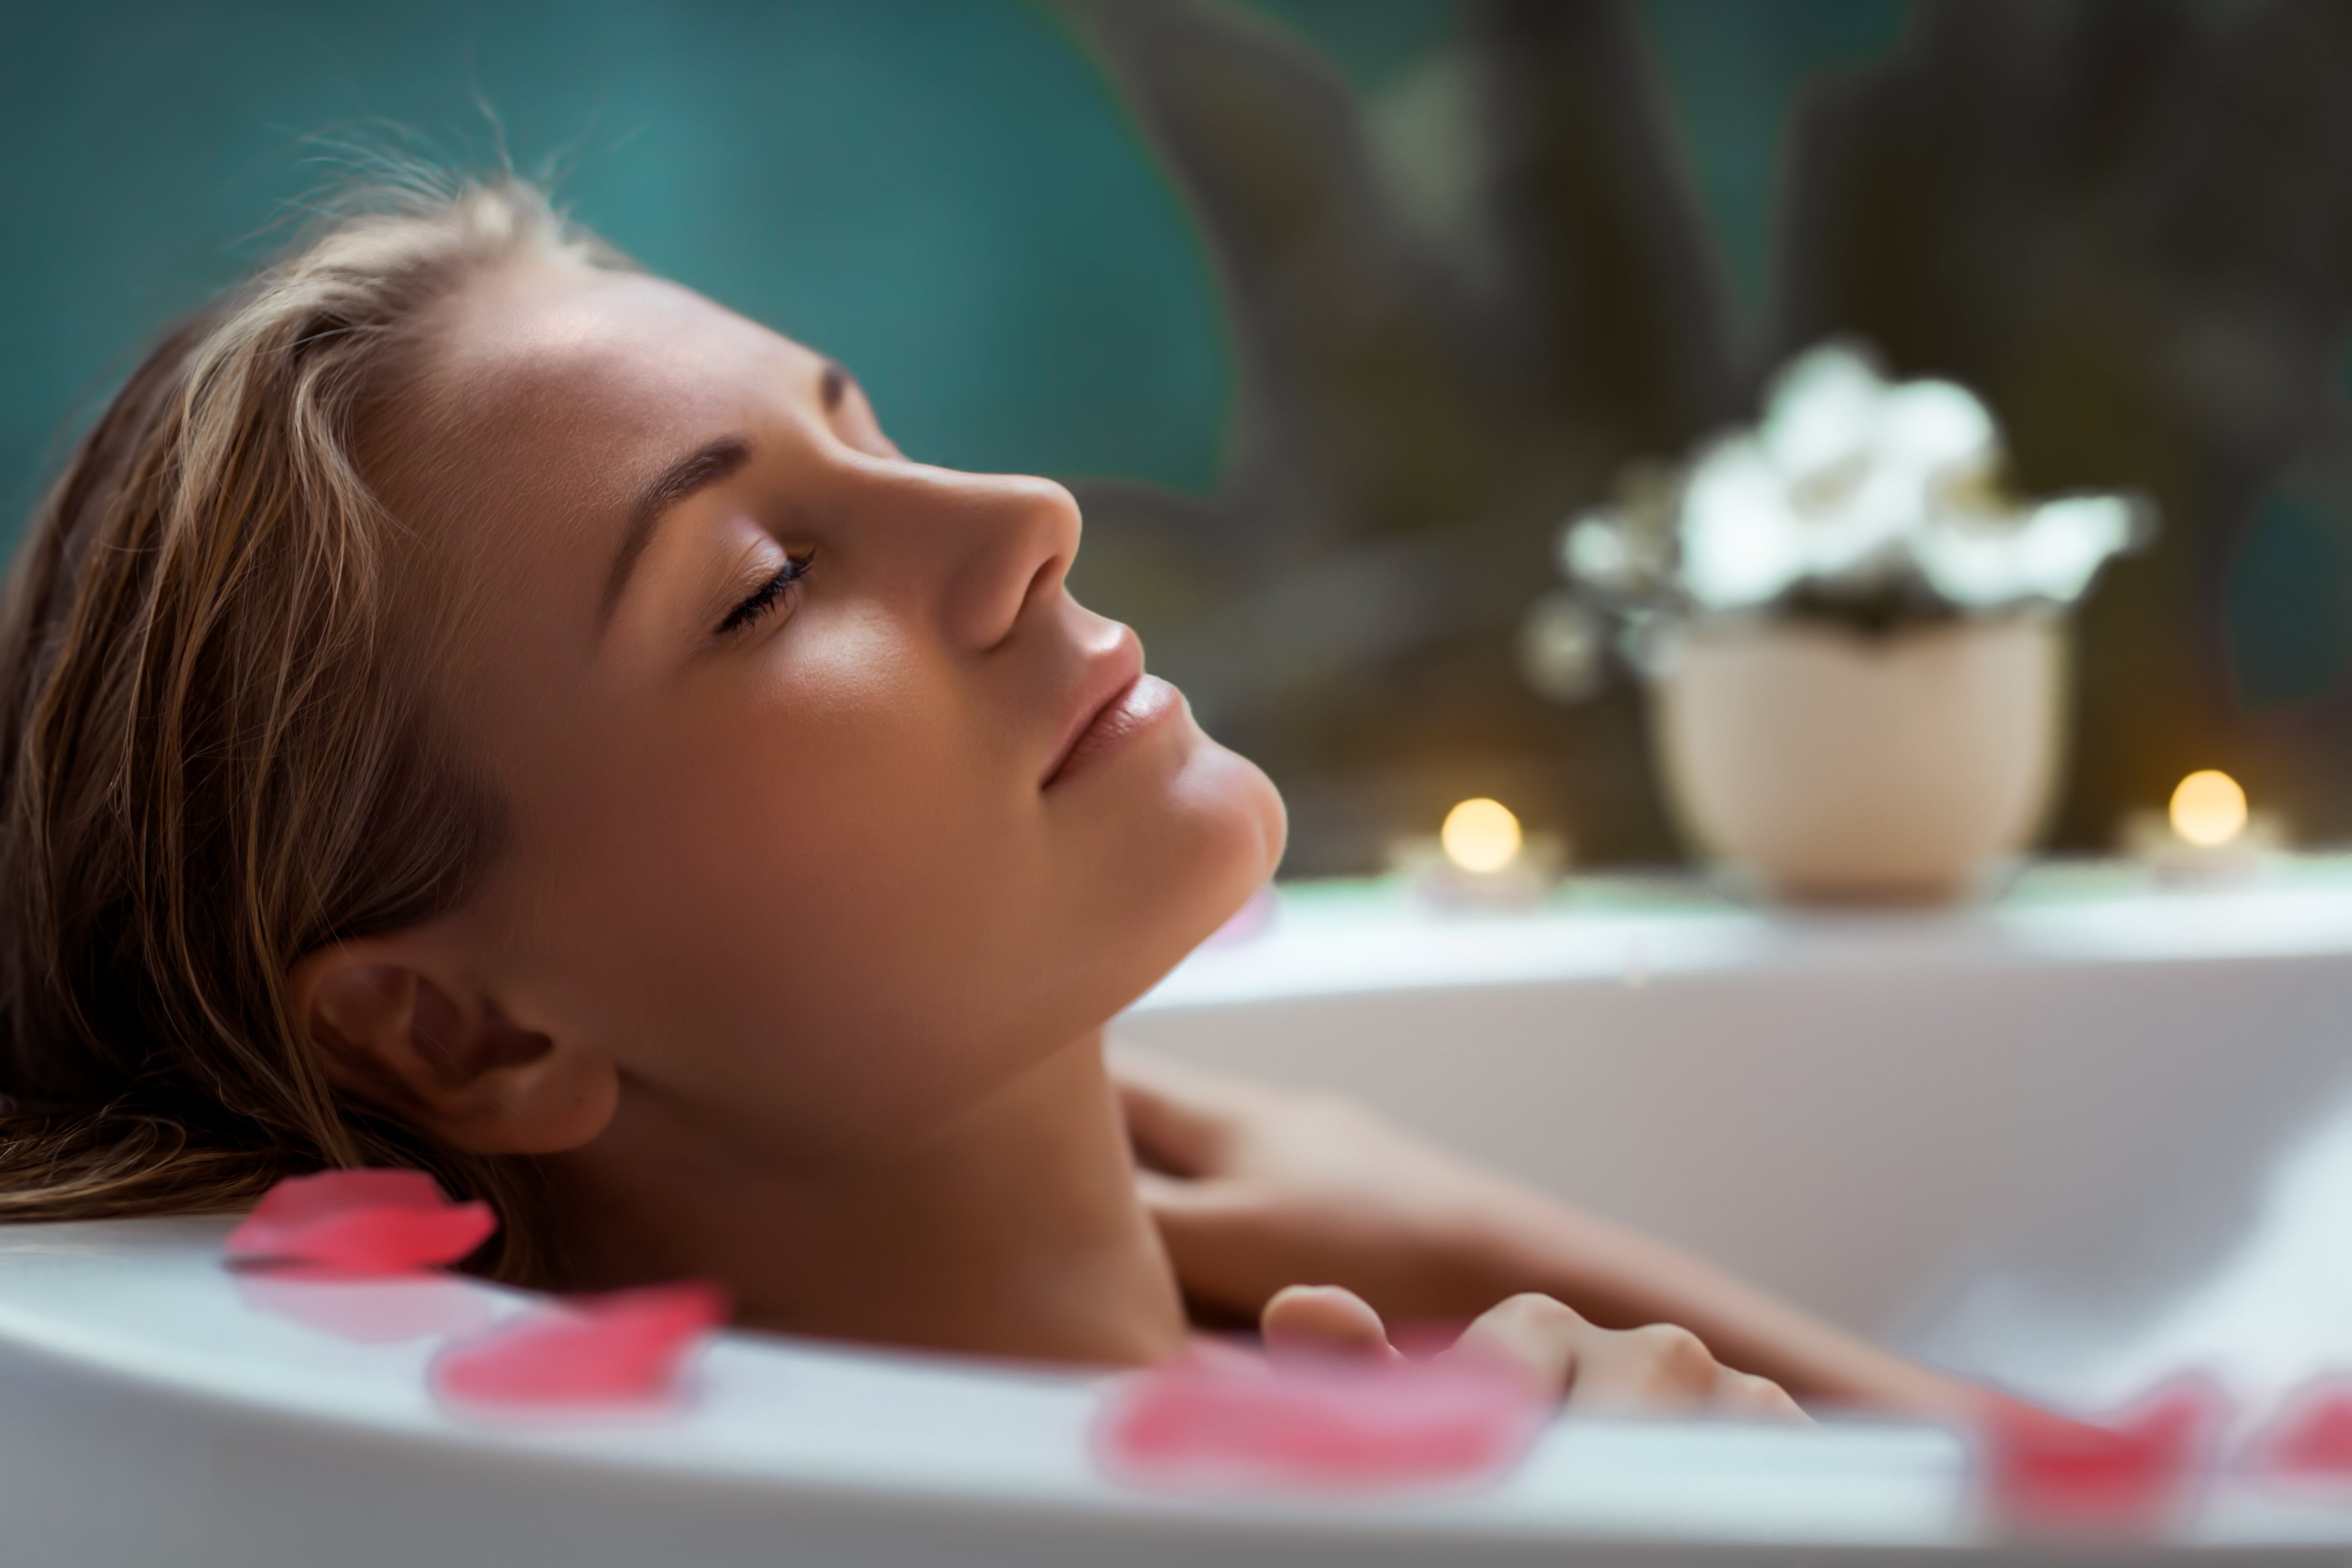 Head shot of a woman lying back in a bath with her eyes closed. There are flower petals around the rim of the bath and candles glow softly in the background.